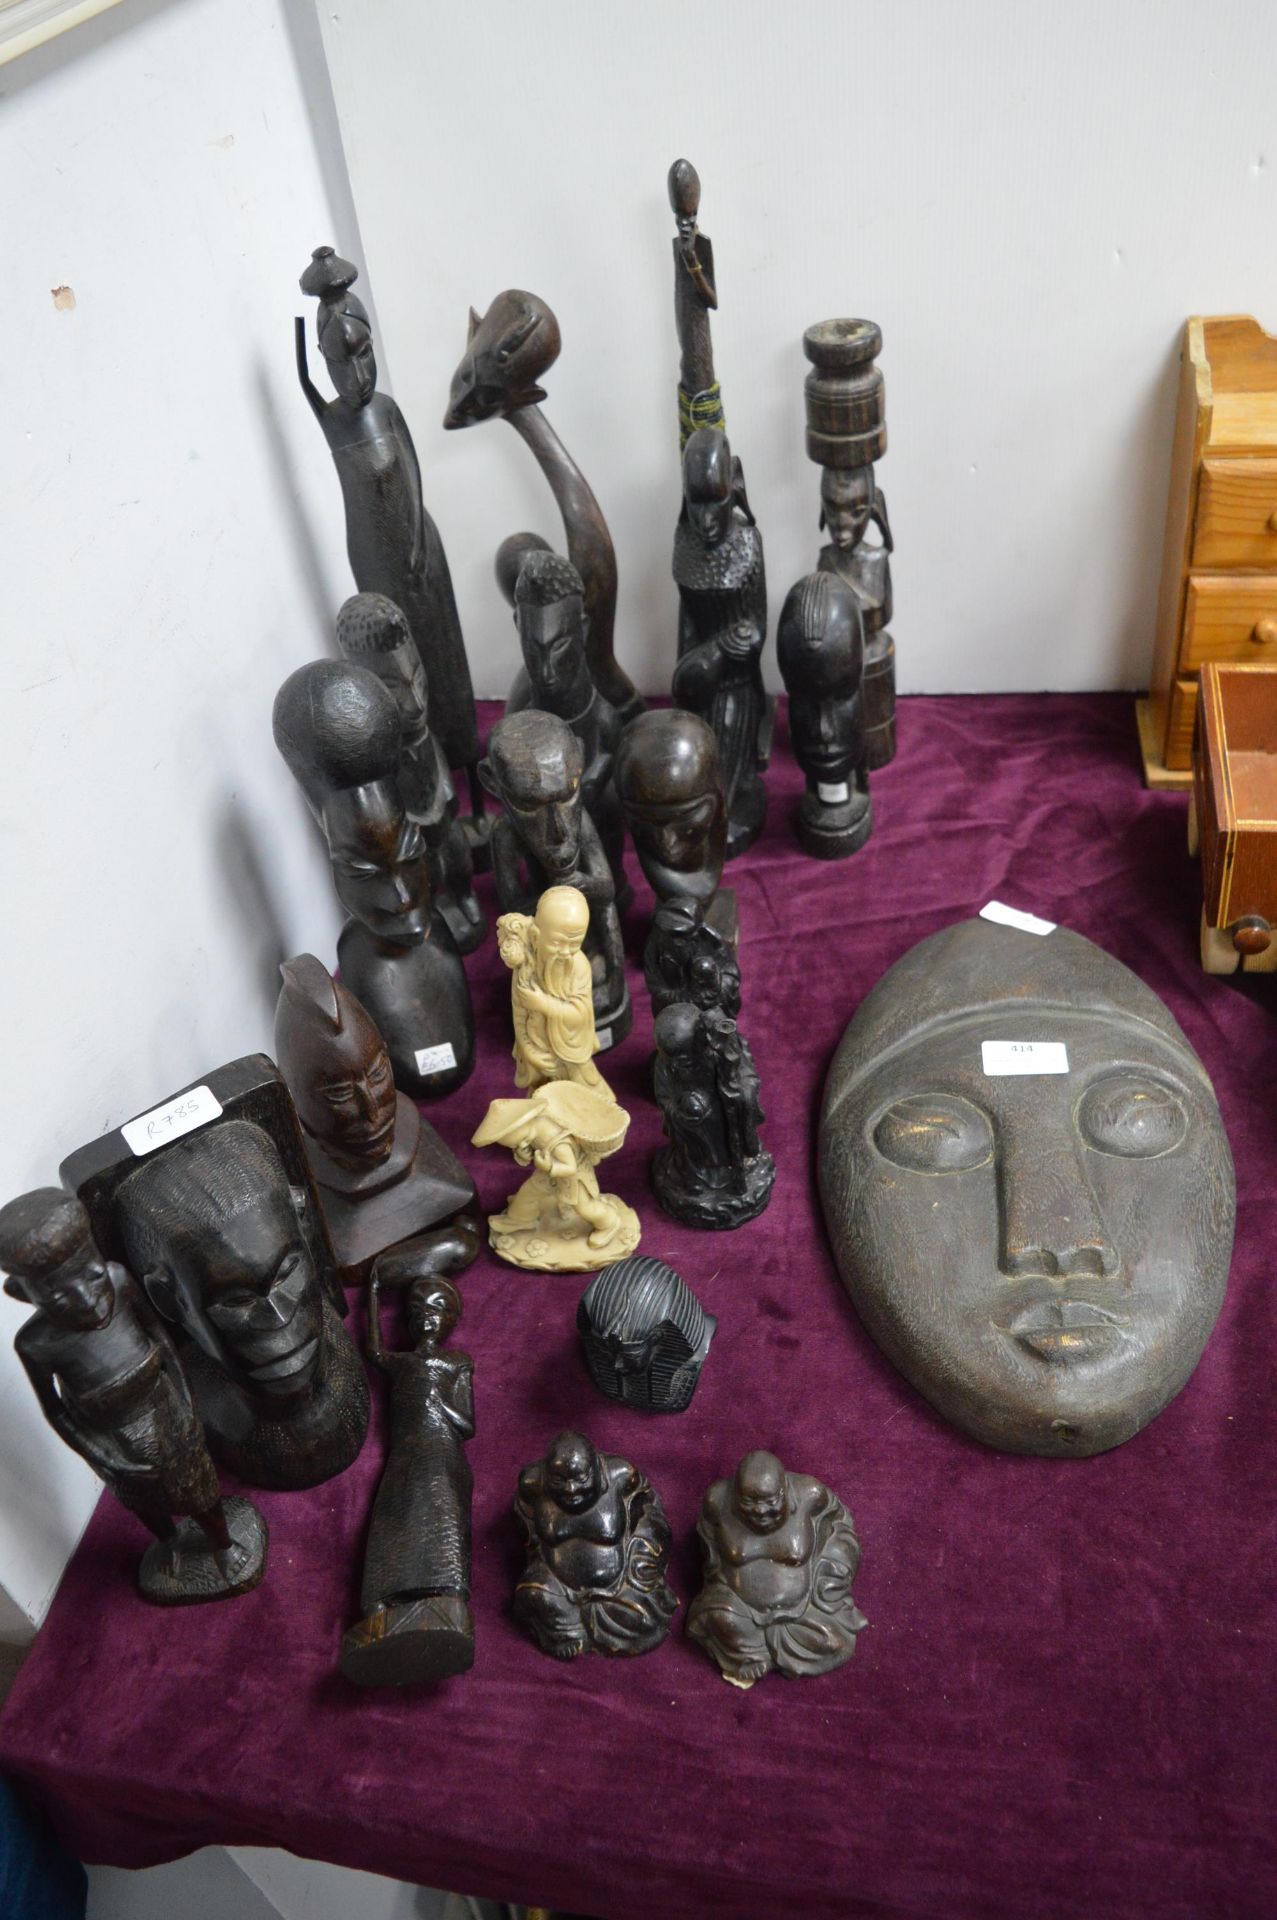 Ethnic Carvings, Figures, and a Wall Mask